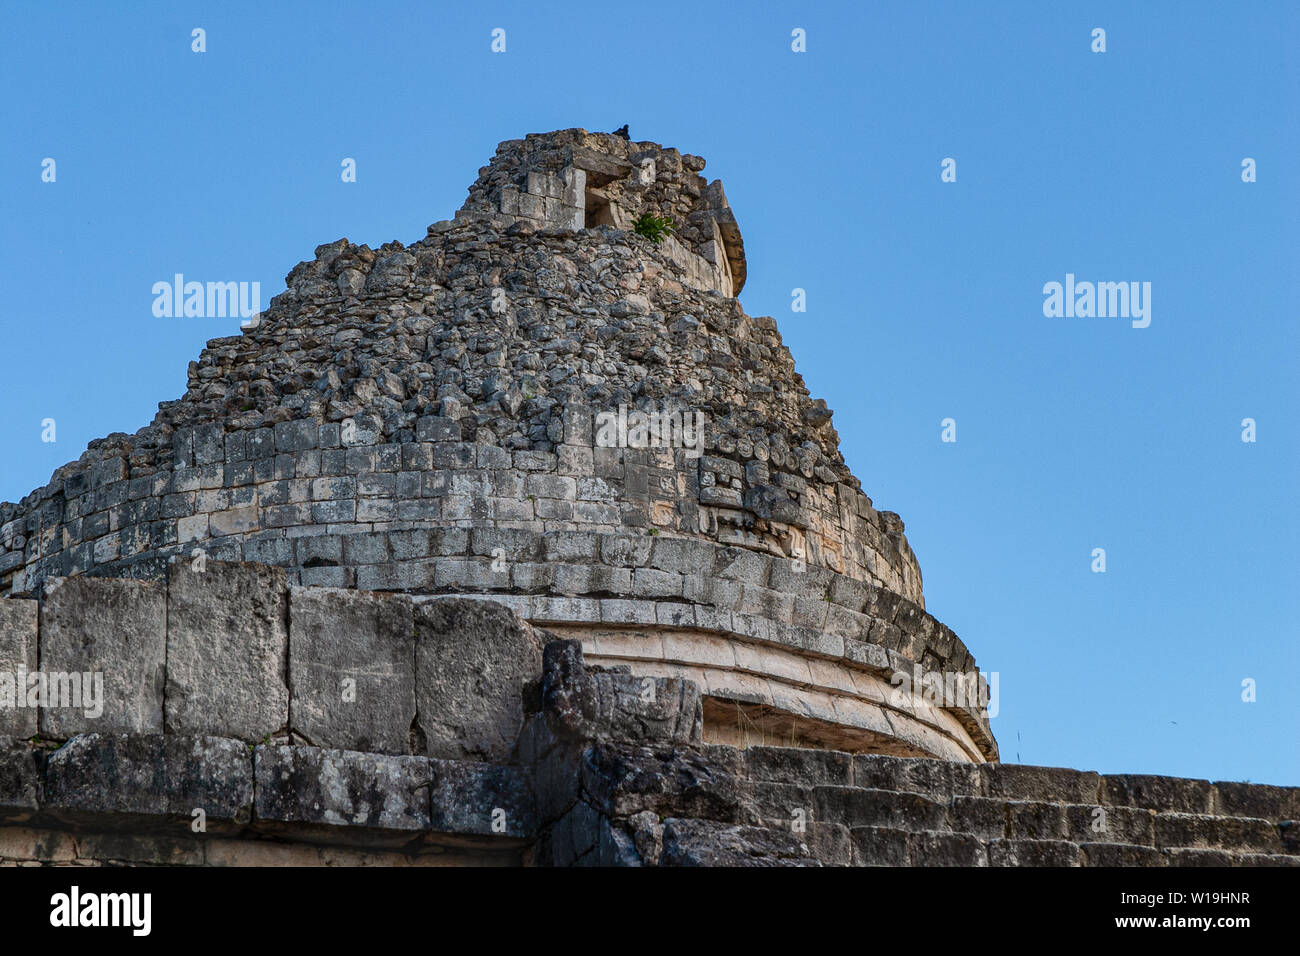 El Caracol, the Observatory at Chichen Itza, Mexico. Stock Photo